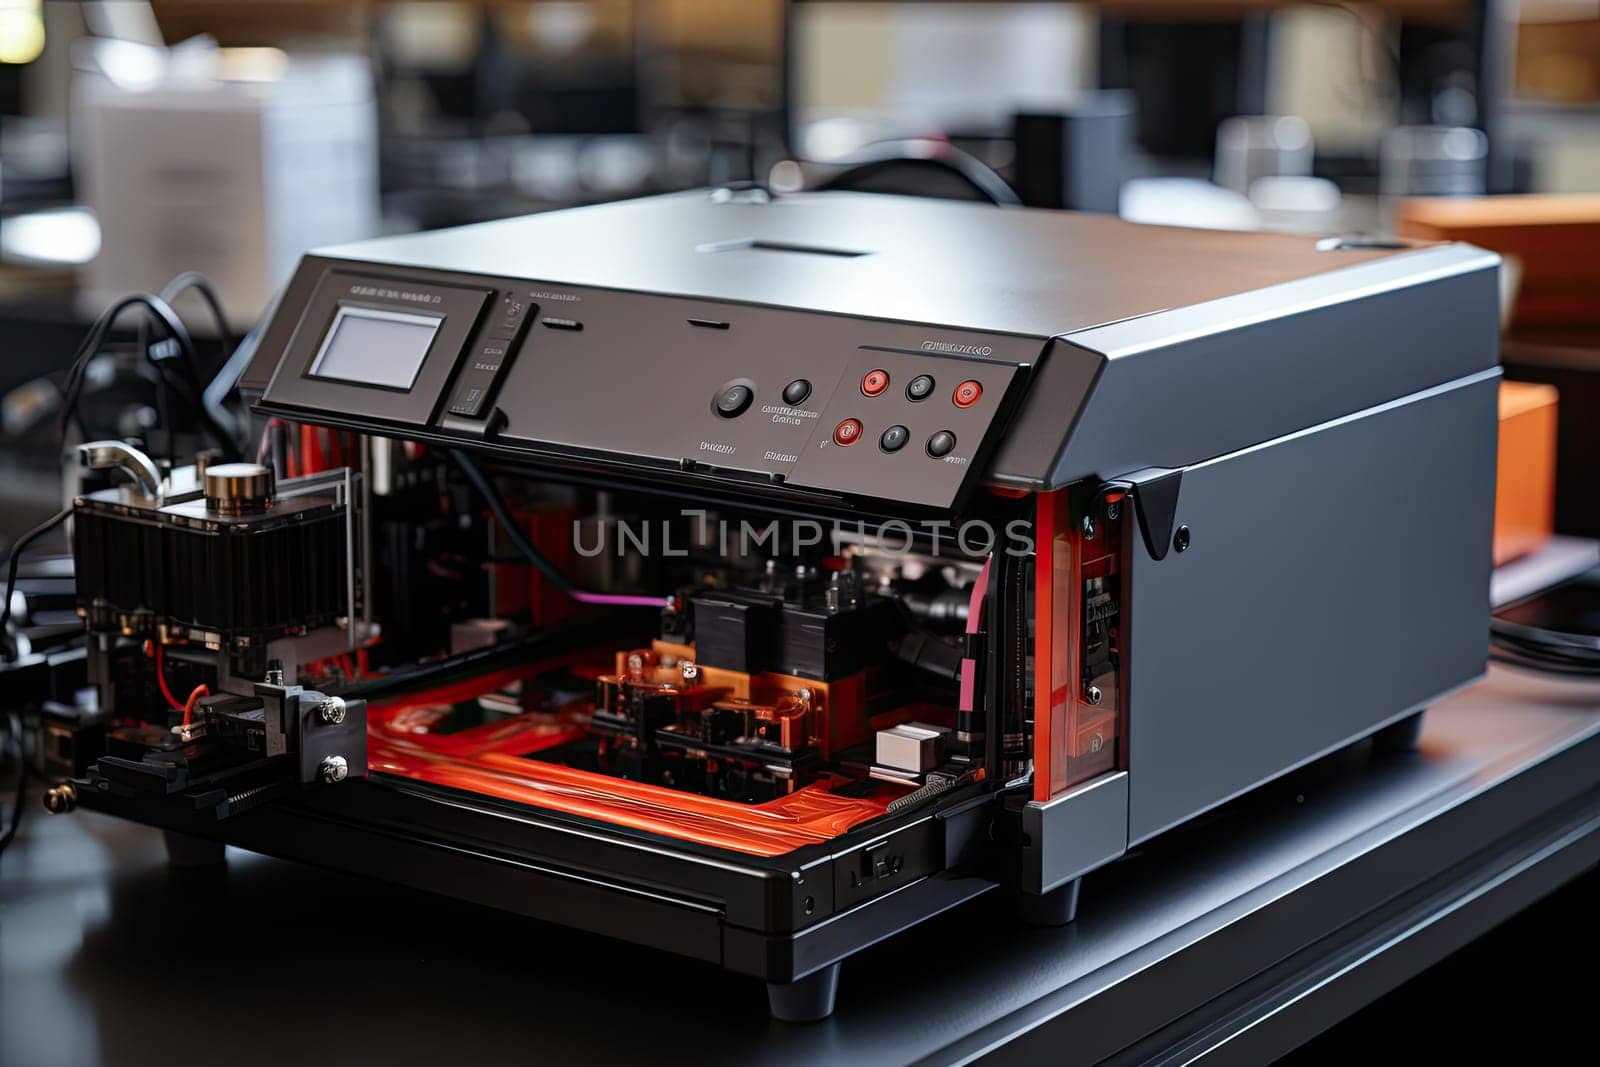 a 3d printer sitting on a table with other machines in the background and an orange light coming from behind it